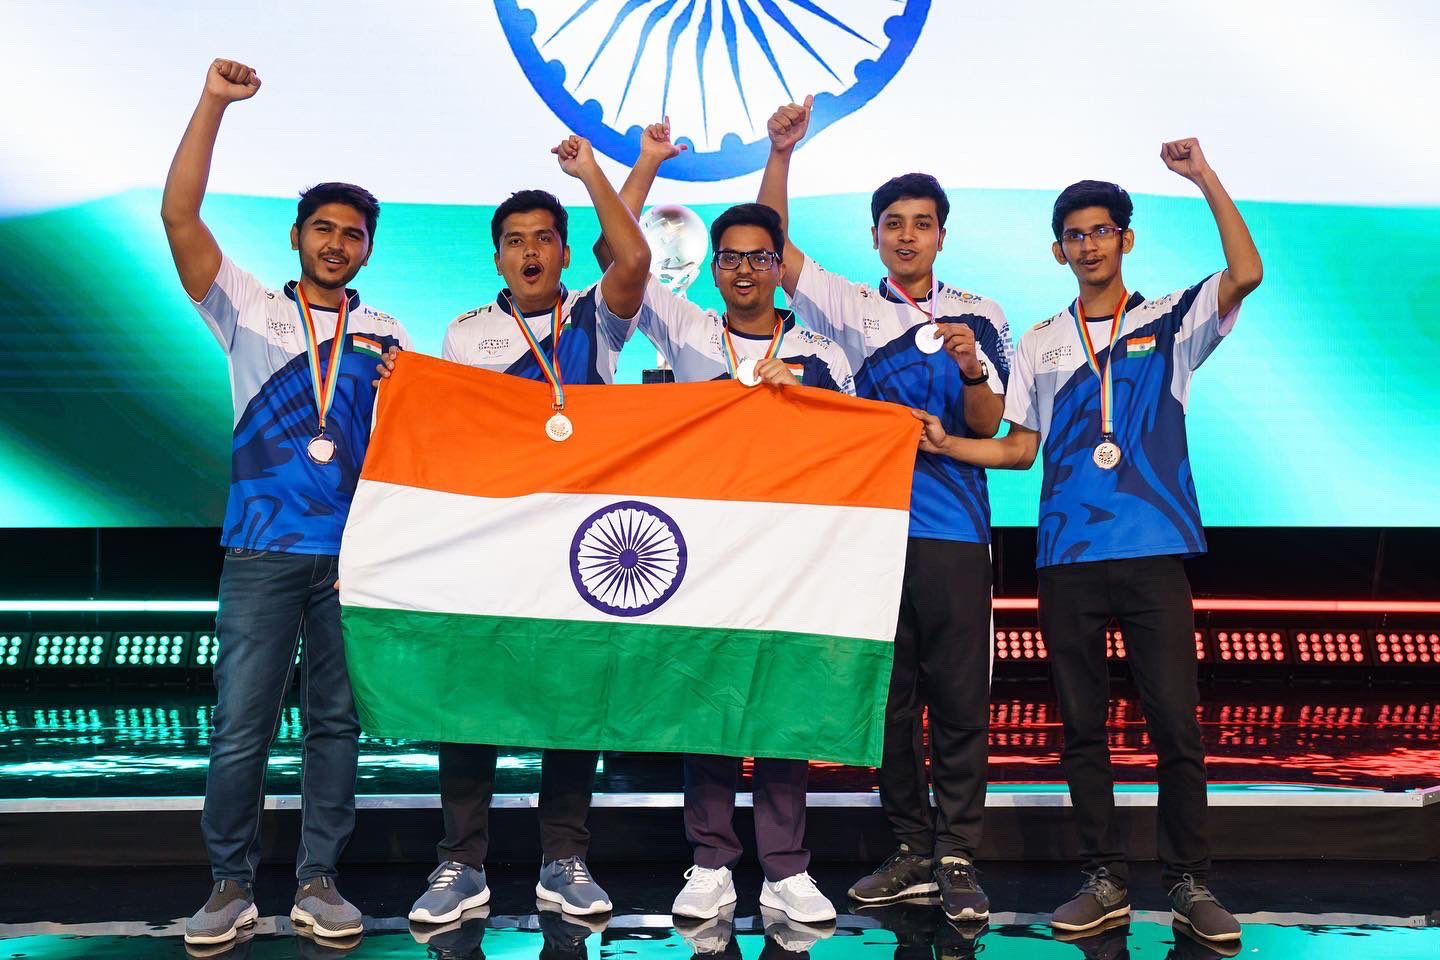 the-bronze-at-the-cec-2022-opens-up-new-horizons-for-indian-esports-internationally